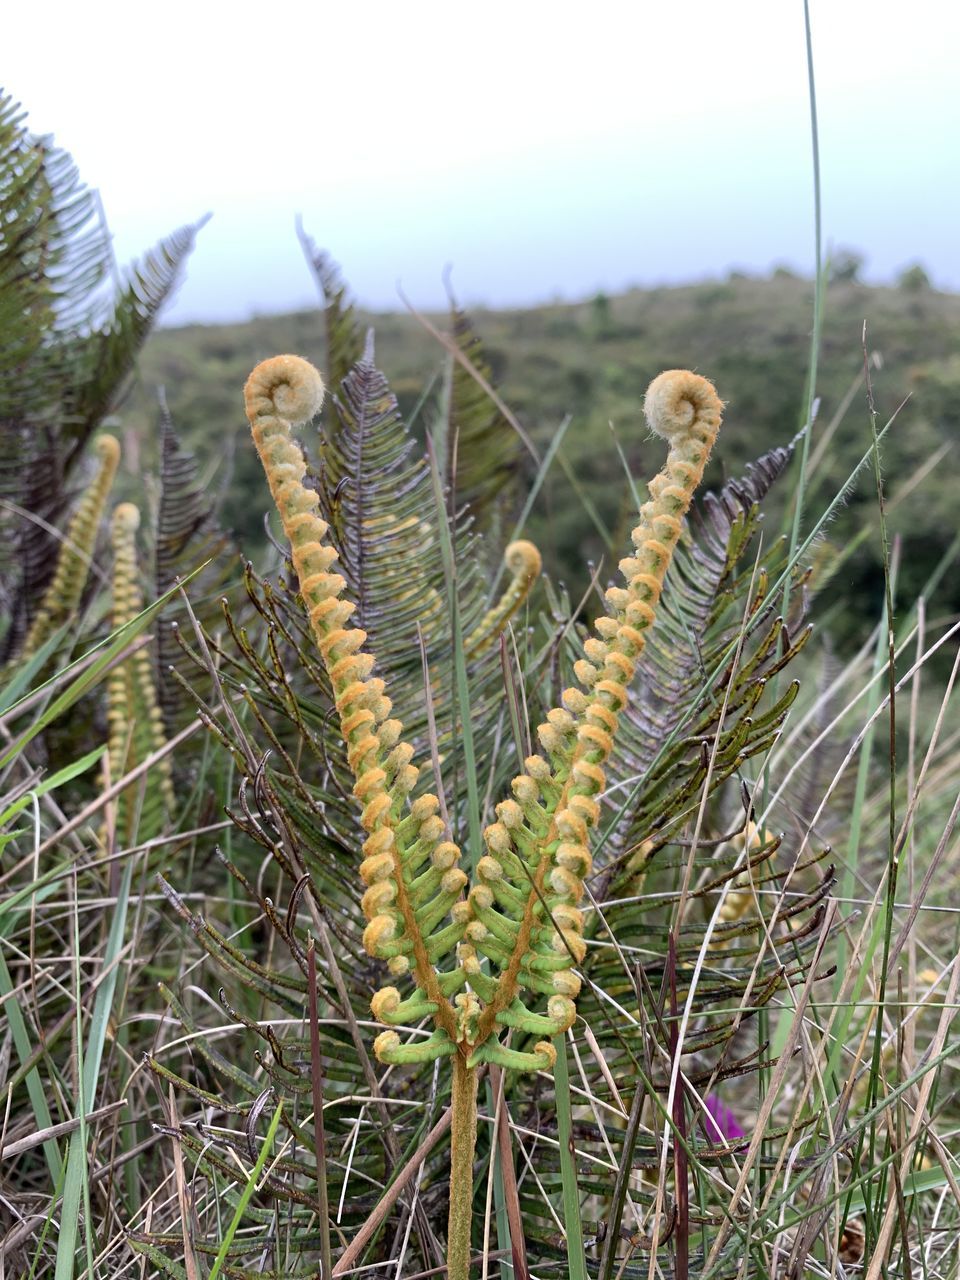 CLOSE-UP OF PLANT GROWING ON FIELD